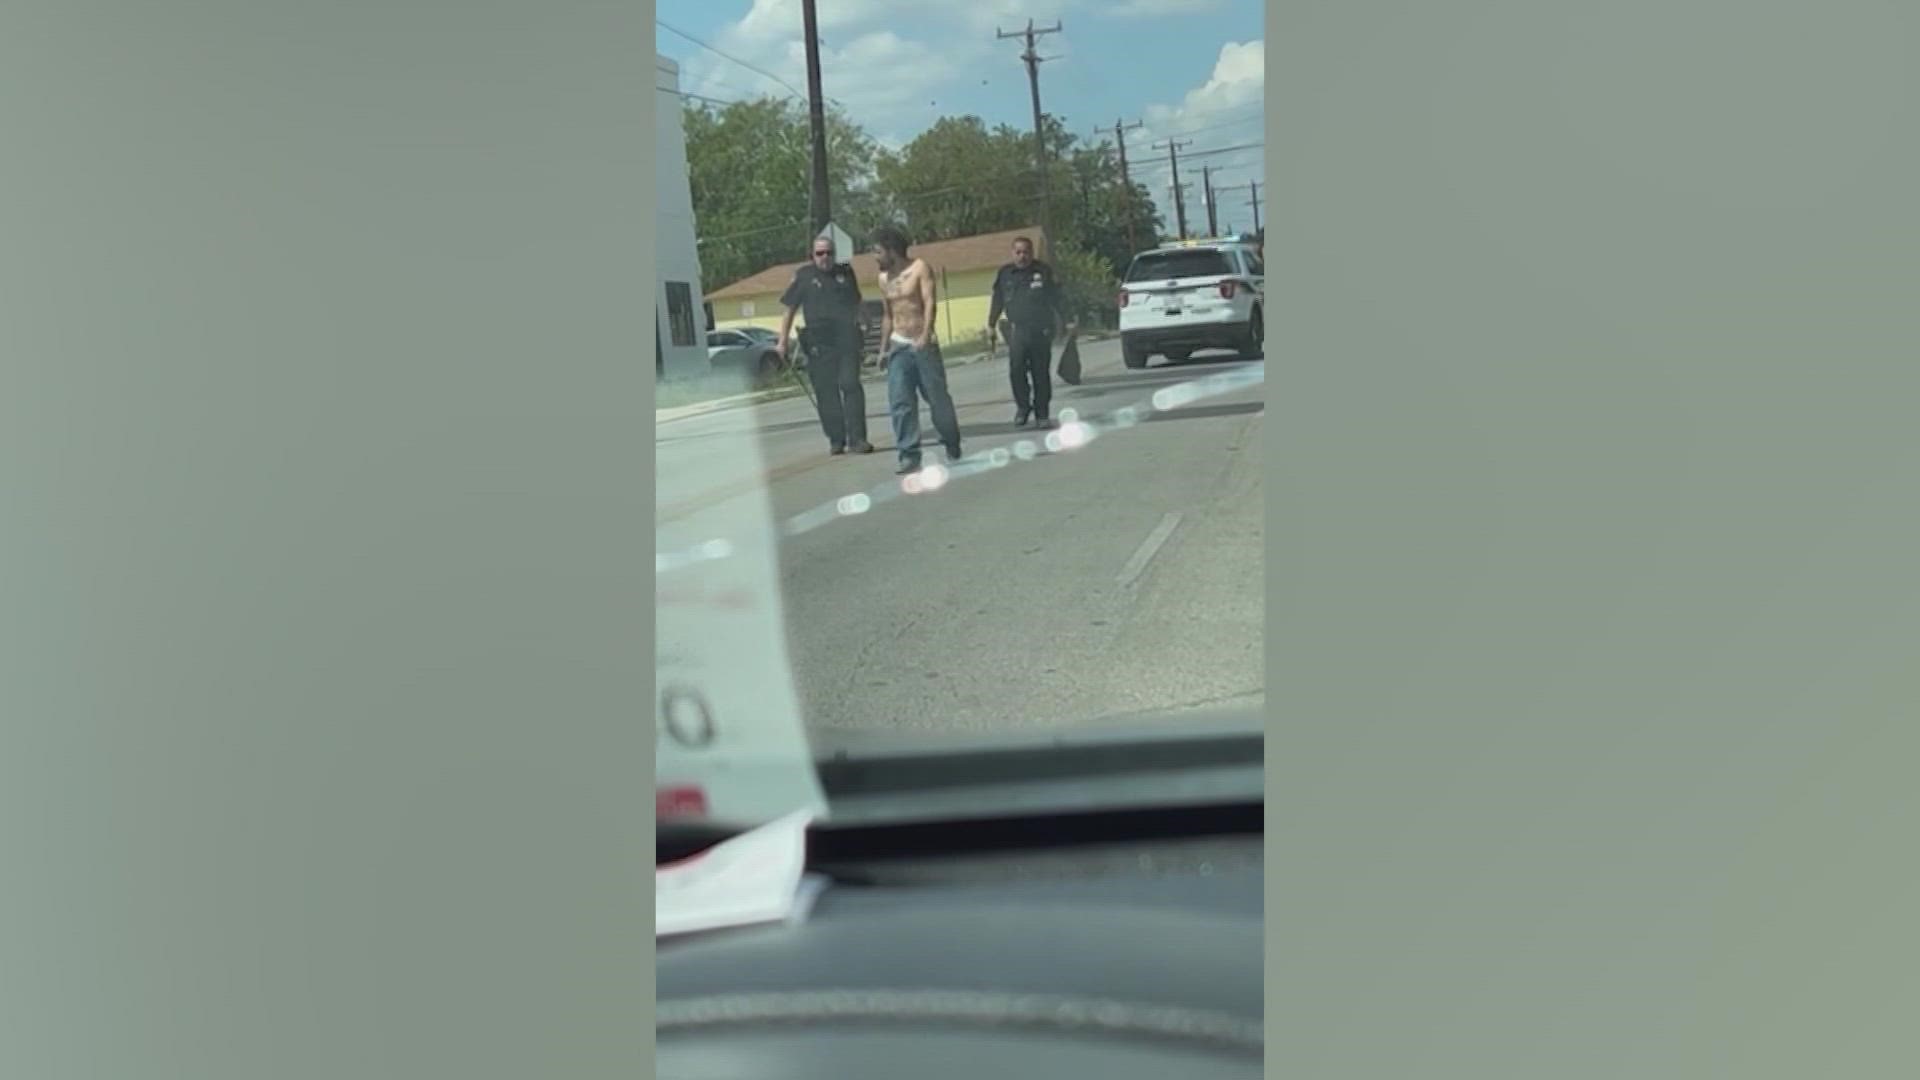 KENS 5 also obtained cell phone video, nearby, which shows SAISD officers trying to arrest a man.